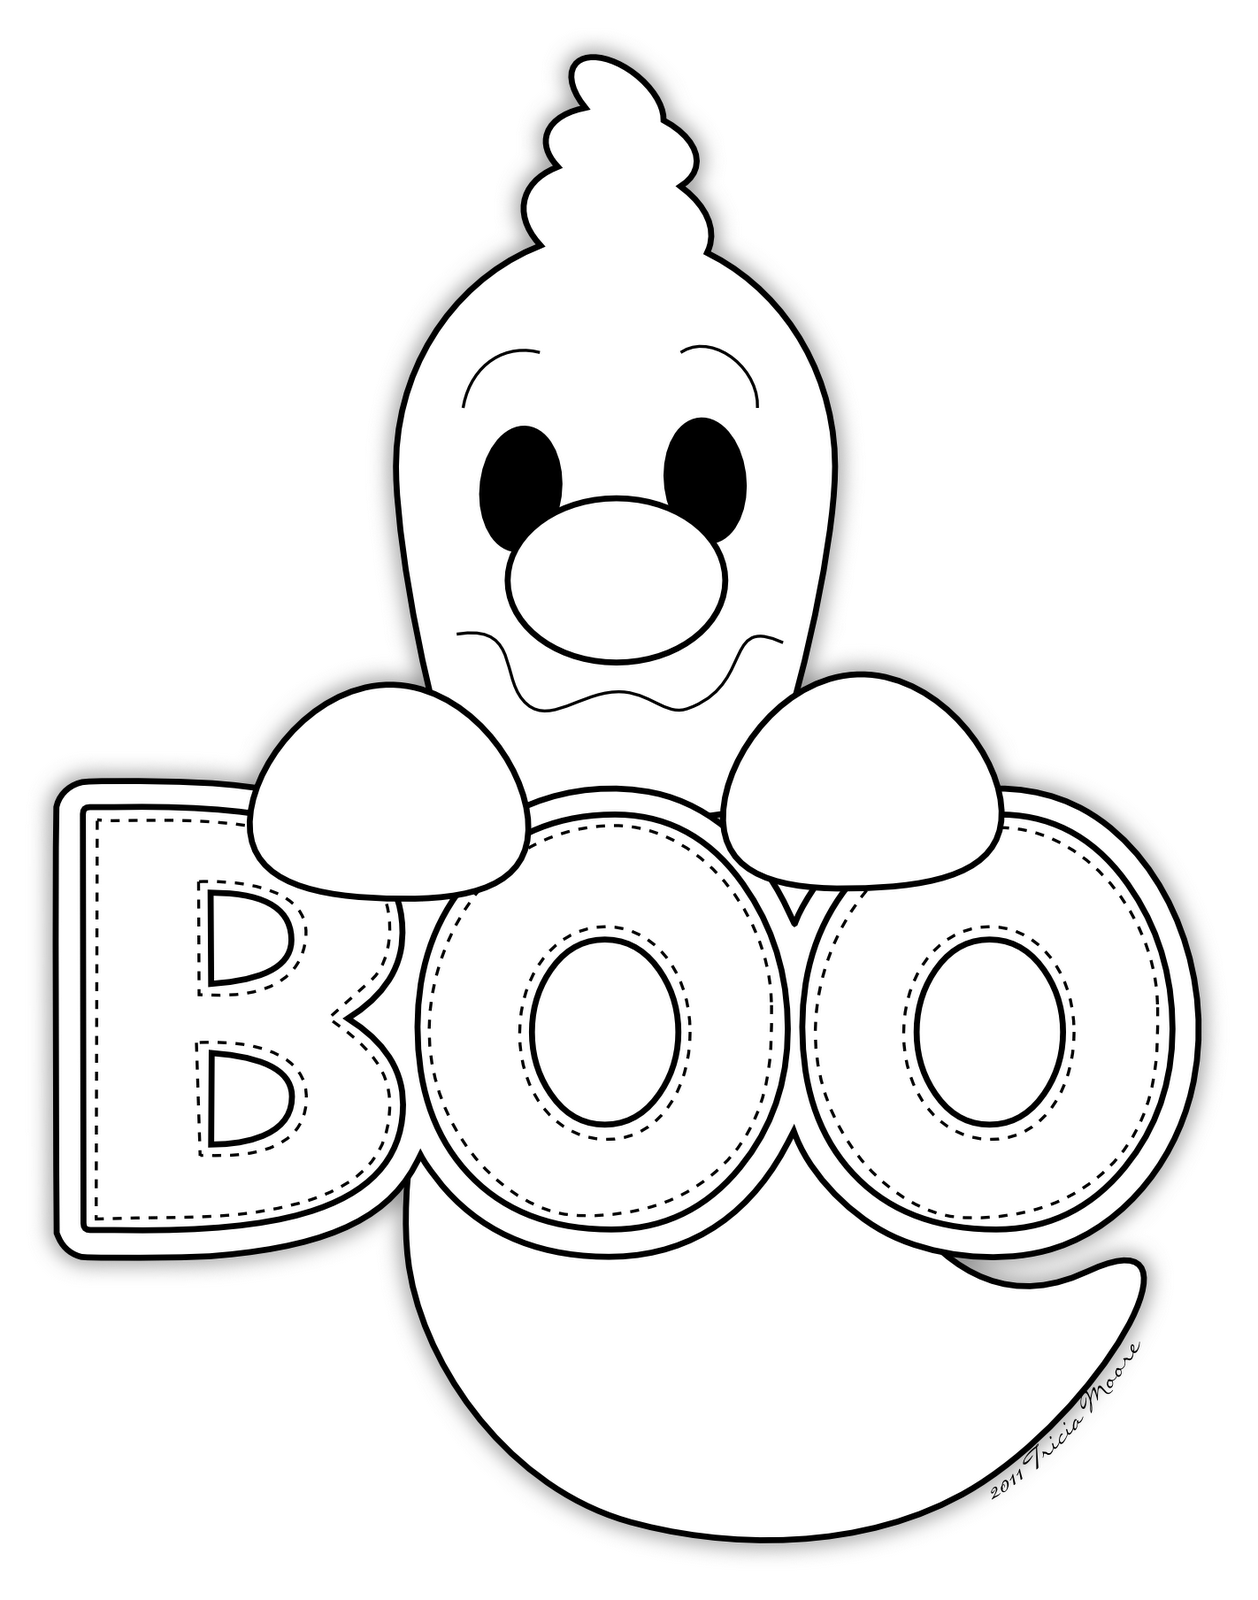 free black and white ghost clipart - photo #49